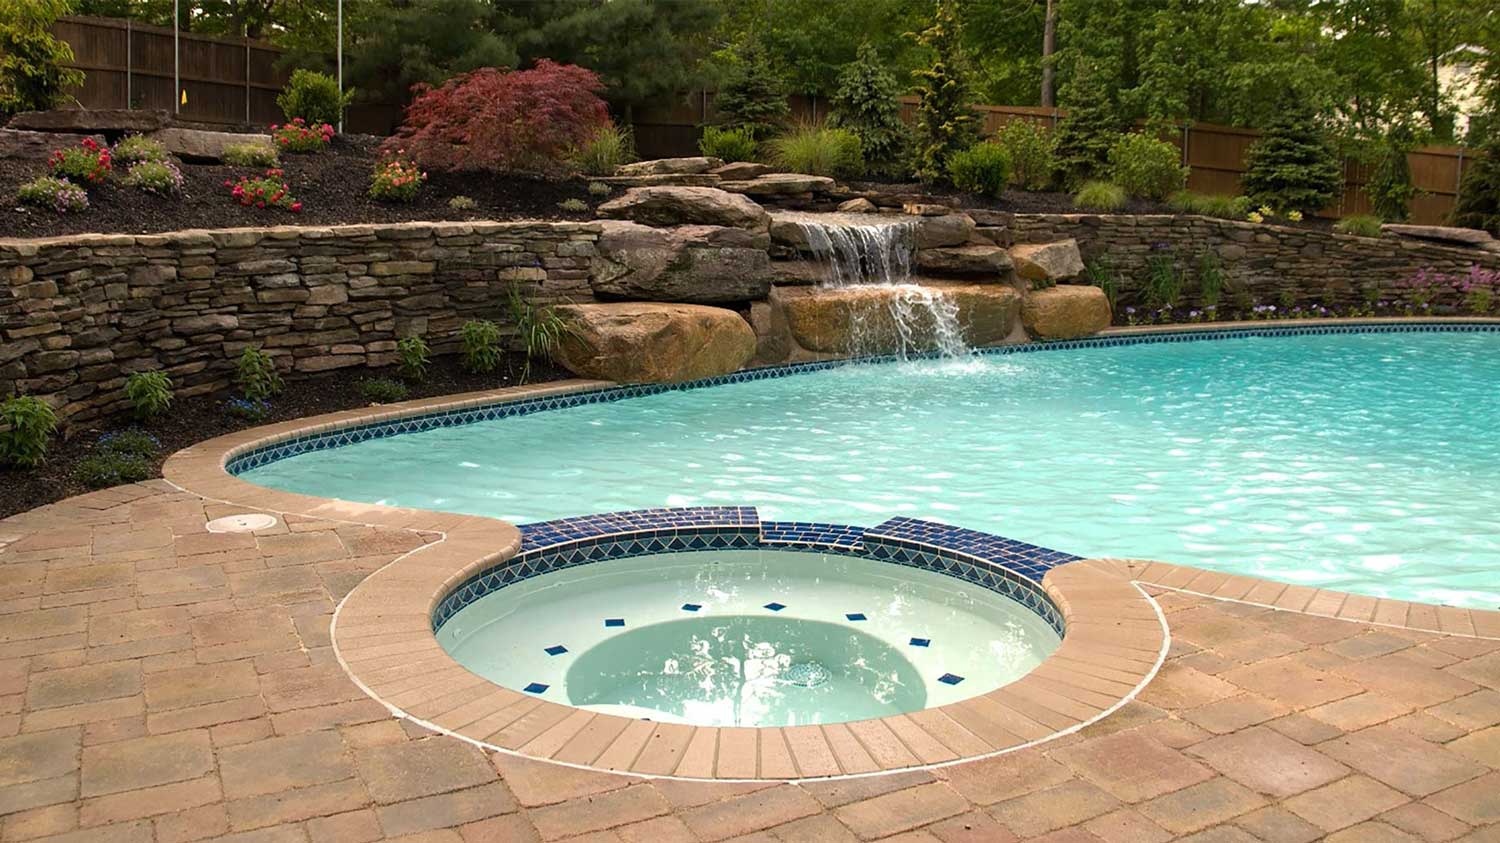 Pool & Water Features